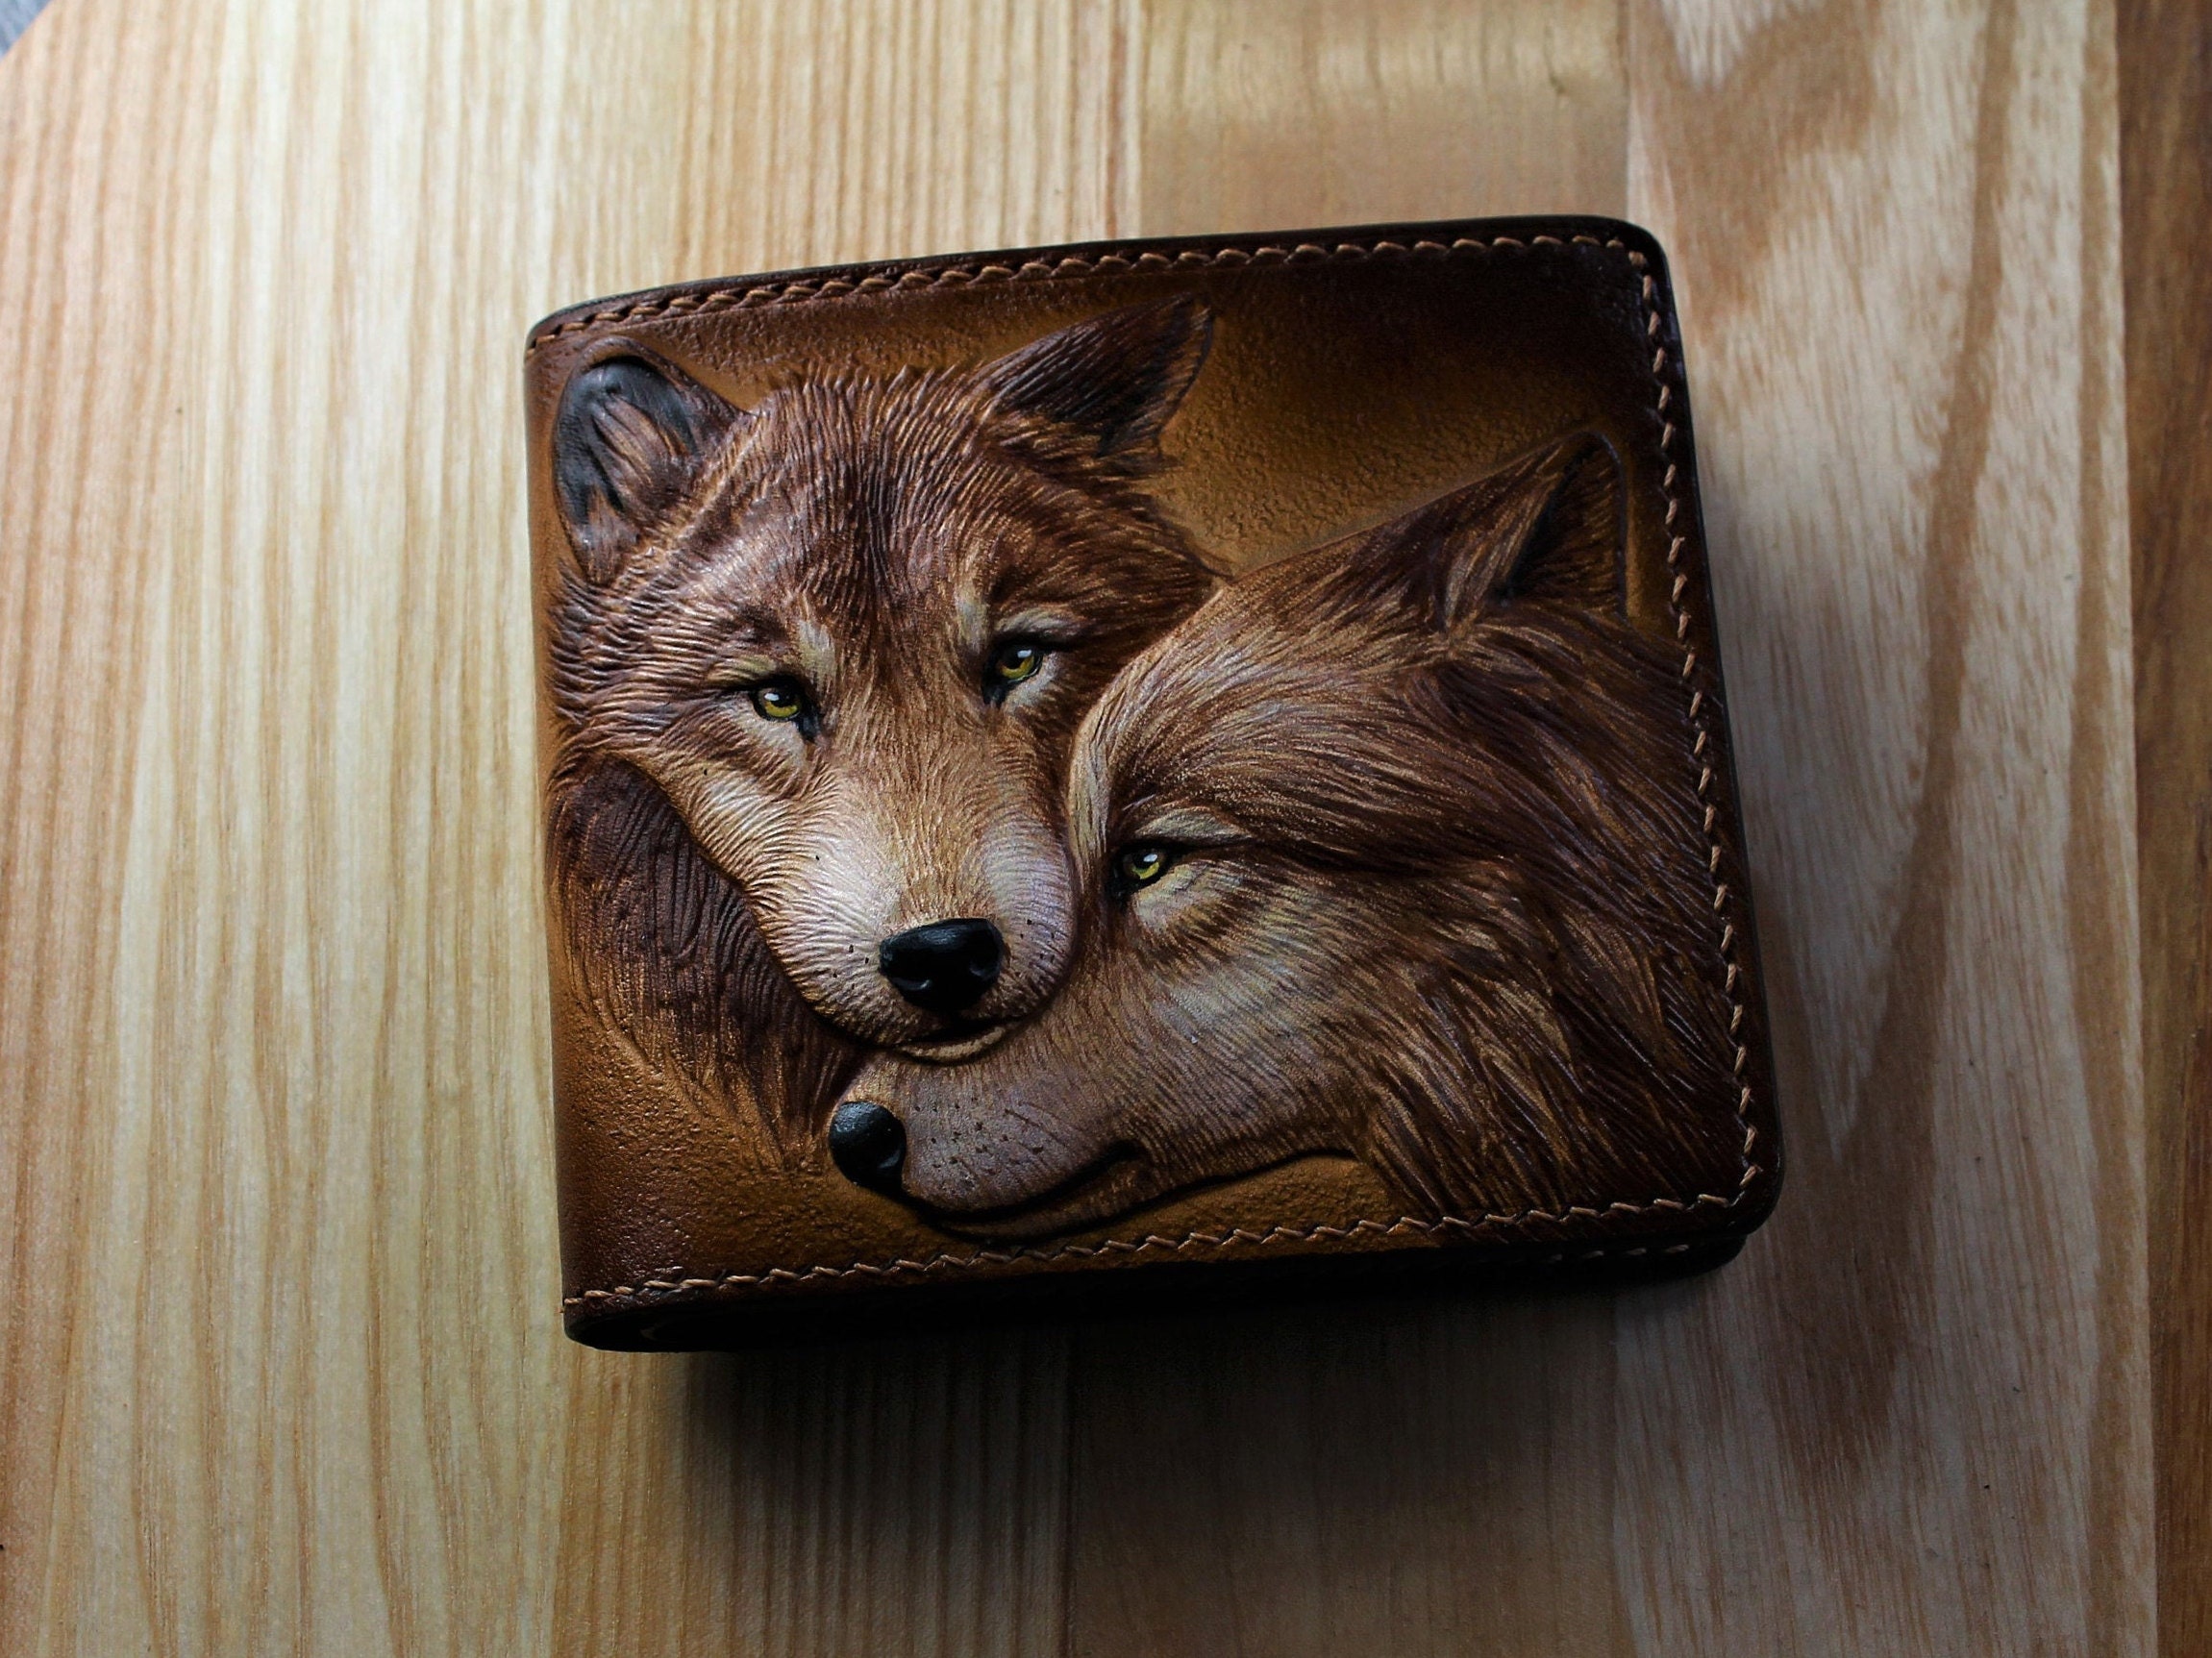 Wolf wallet. Leather women coin purse with hand painted custom art